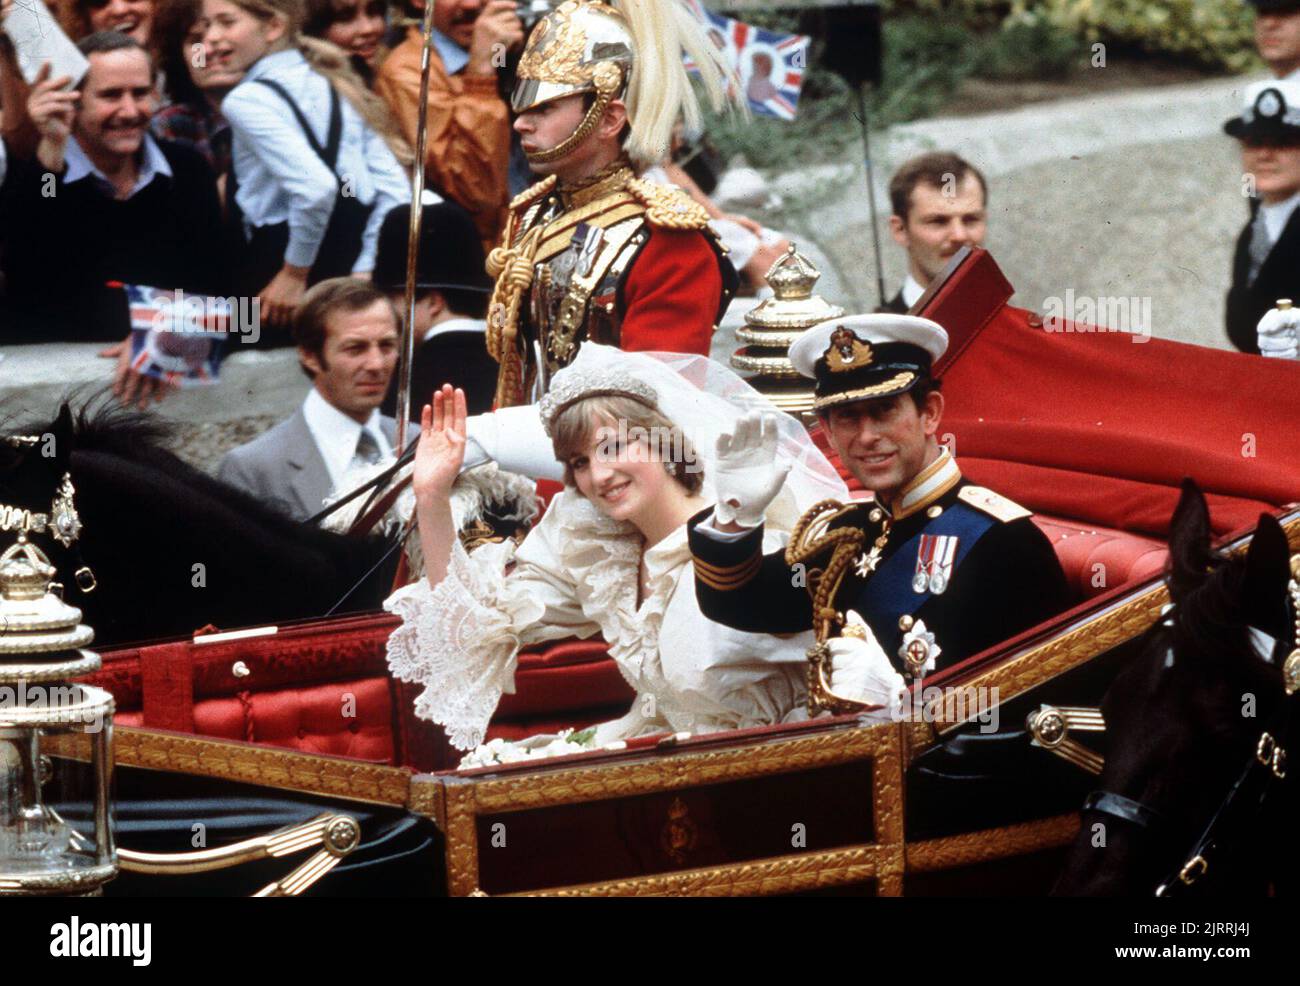 File photo dated 29/07/81 of the Prince and Princess of Wales during their carriage procession to Buckingham Palace after their wedding at St.Paul's Cathedral, London. Diana, Princess of Wales, was killed on August 31 1997 in a car crash in the Pont de l'Alma tunnel in Paris. Issue date: Friday August 26, 2022. Stock Photo